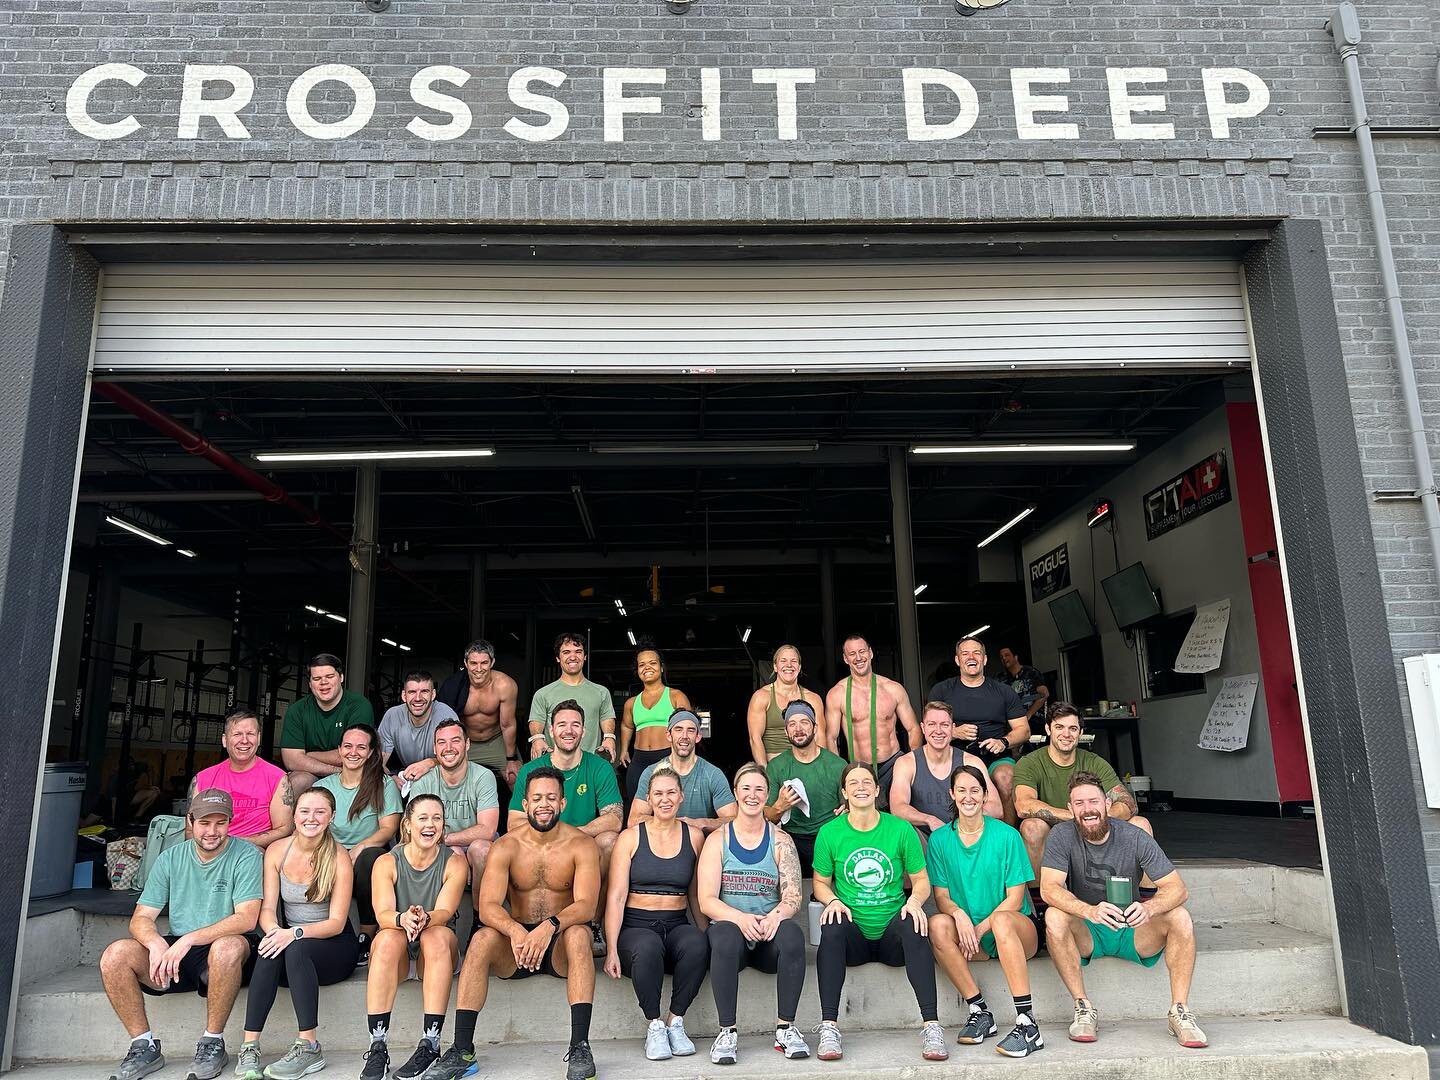 Celebrating Dwarfism Awareness Month! 
.
.
Thanks to all who came out to workout with us. So proud of this community and all we do to support each other! 

If you have any questions about adaptive training programs, please message us or find a coach 